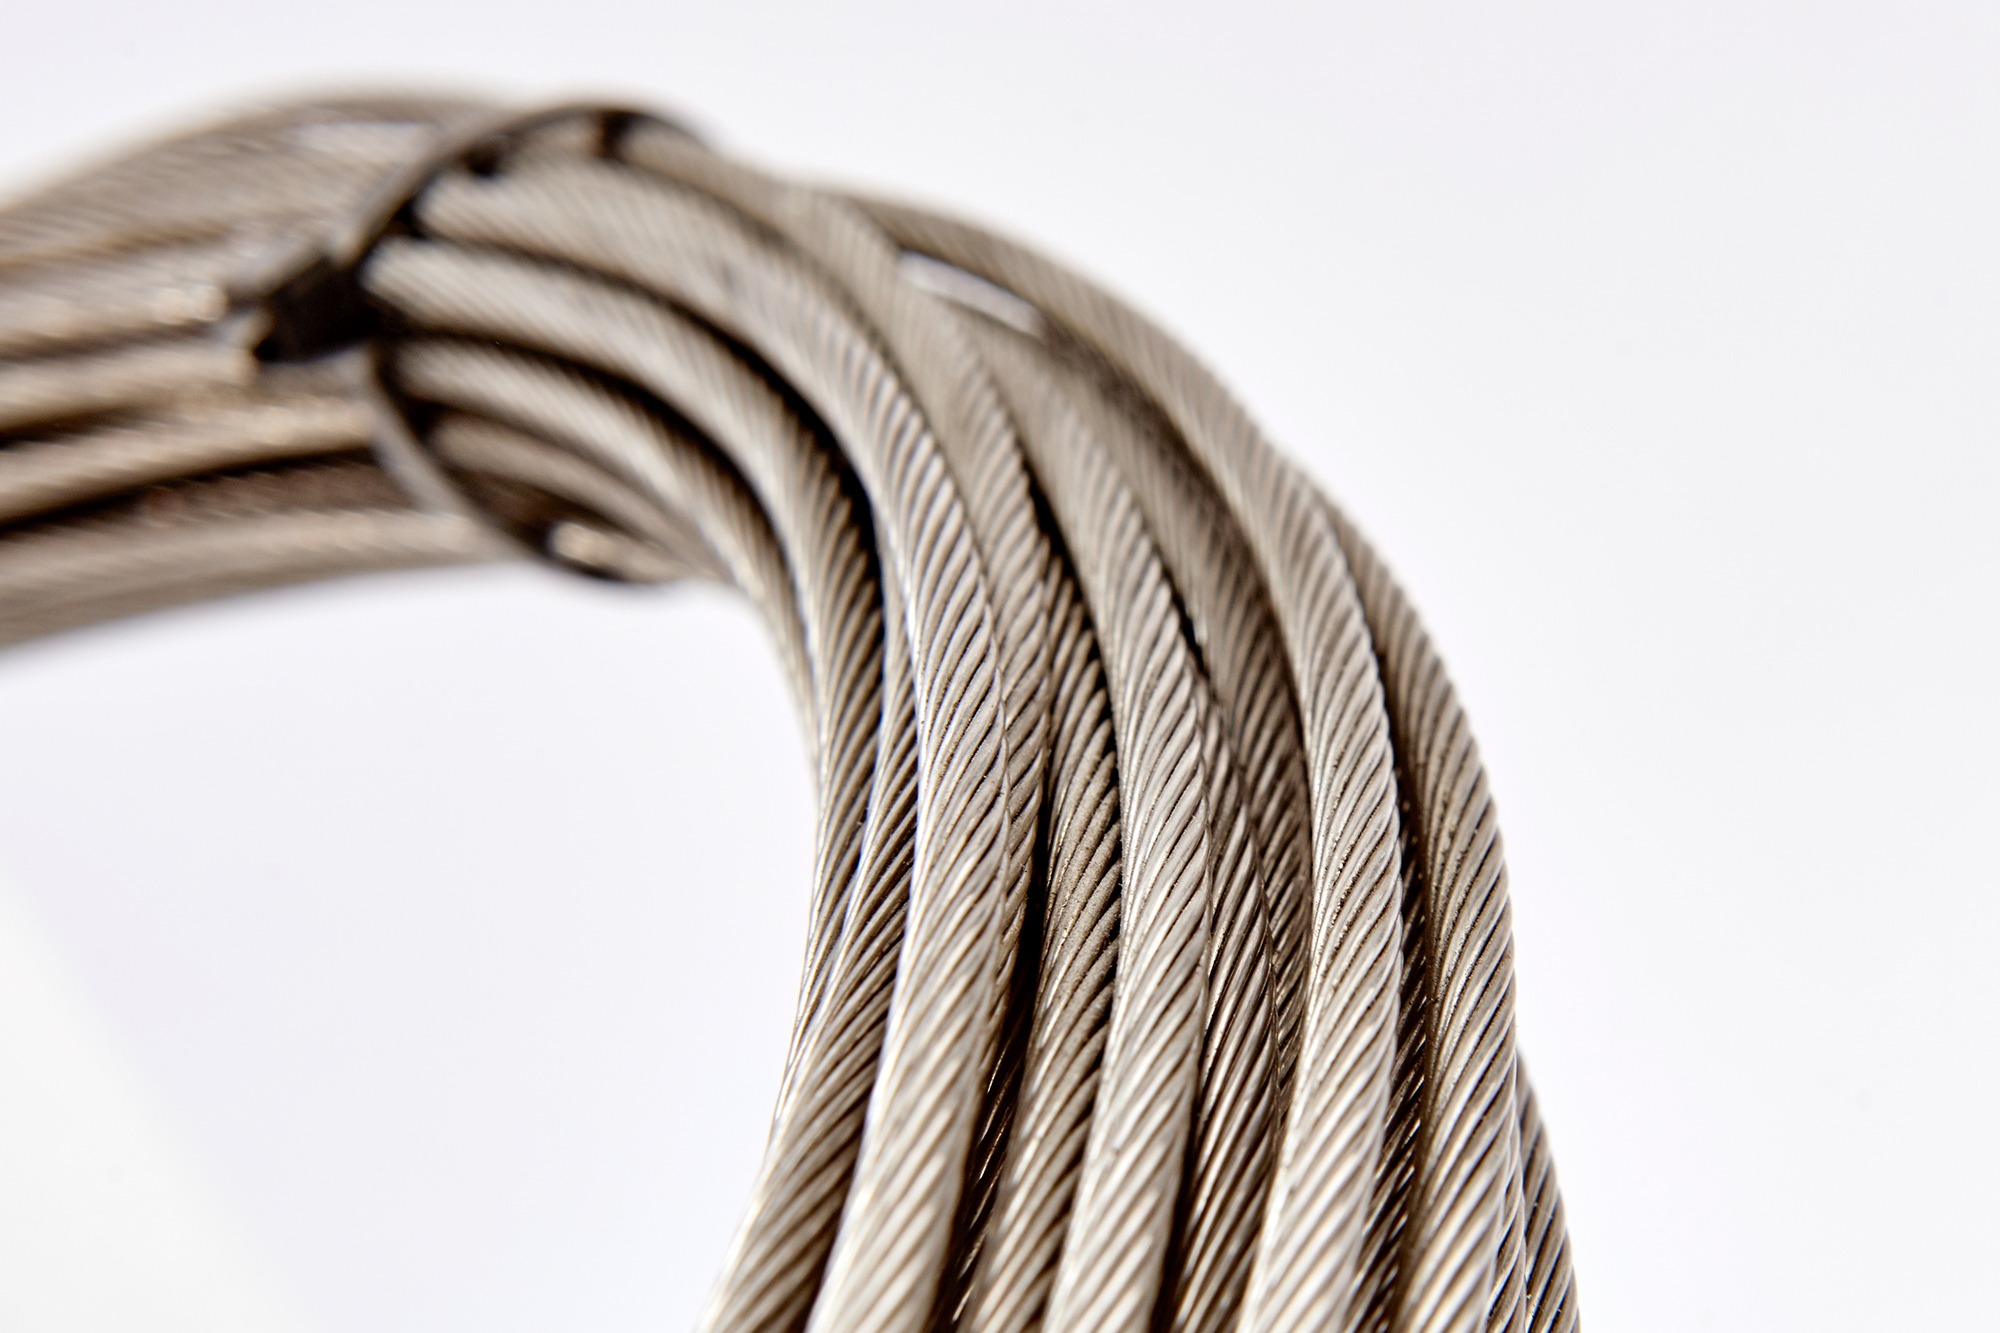 Stainless Steel DTD 189A is available in bars and wire rope